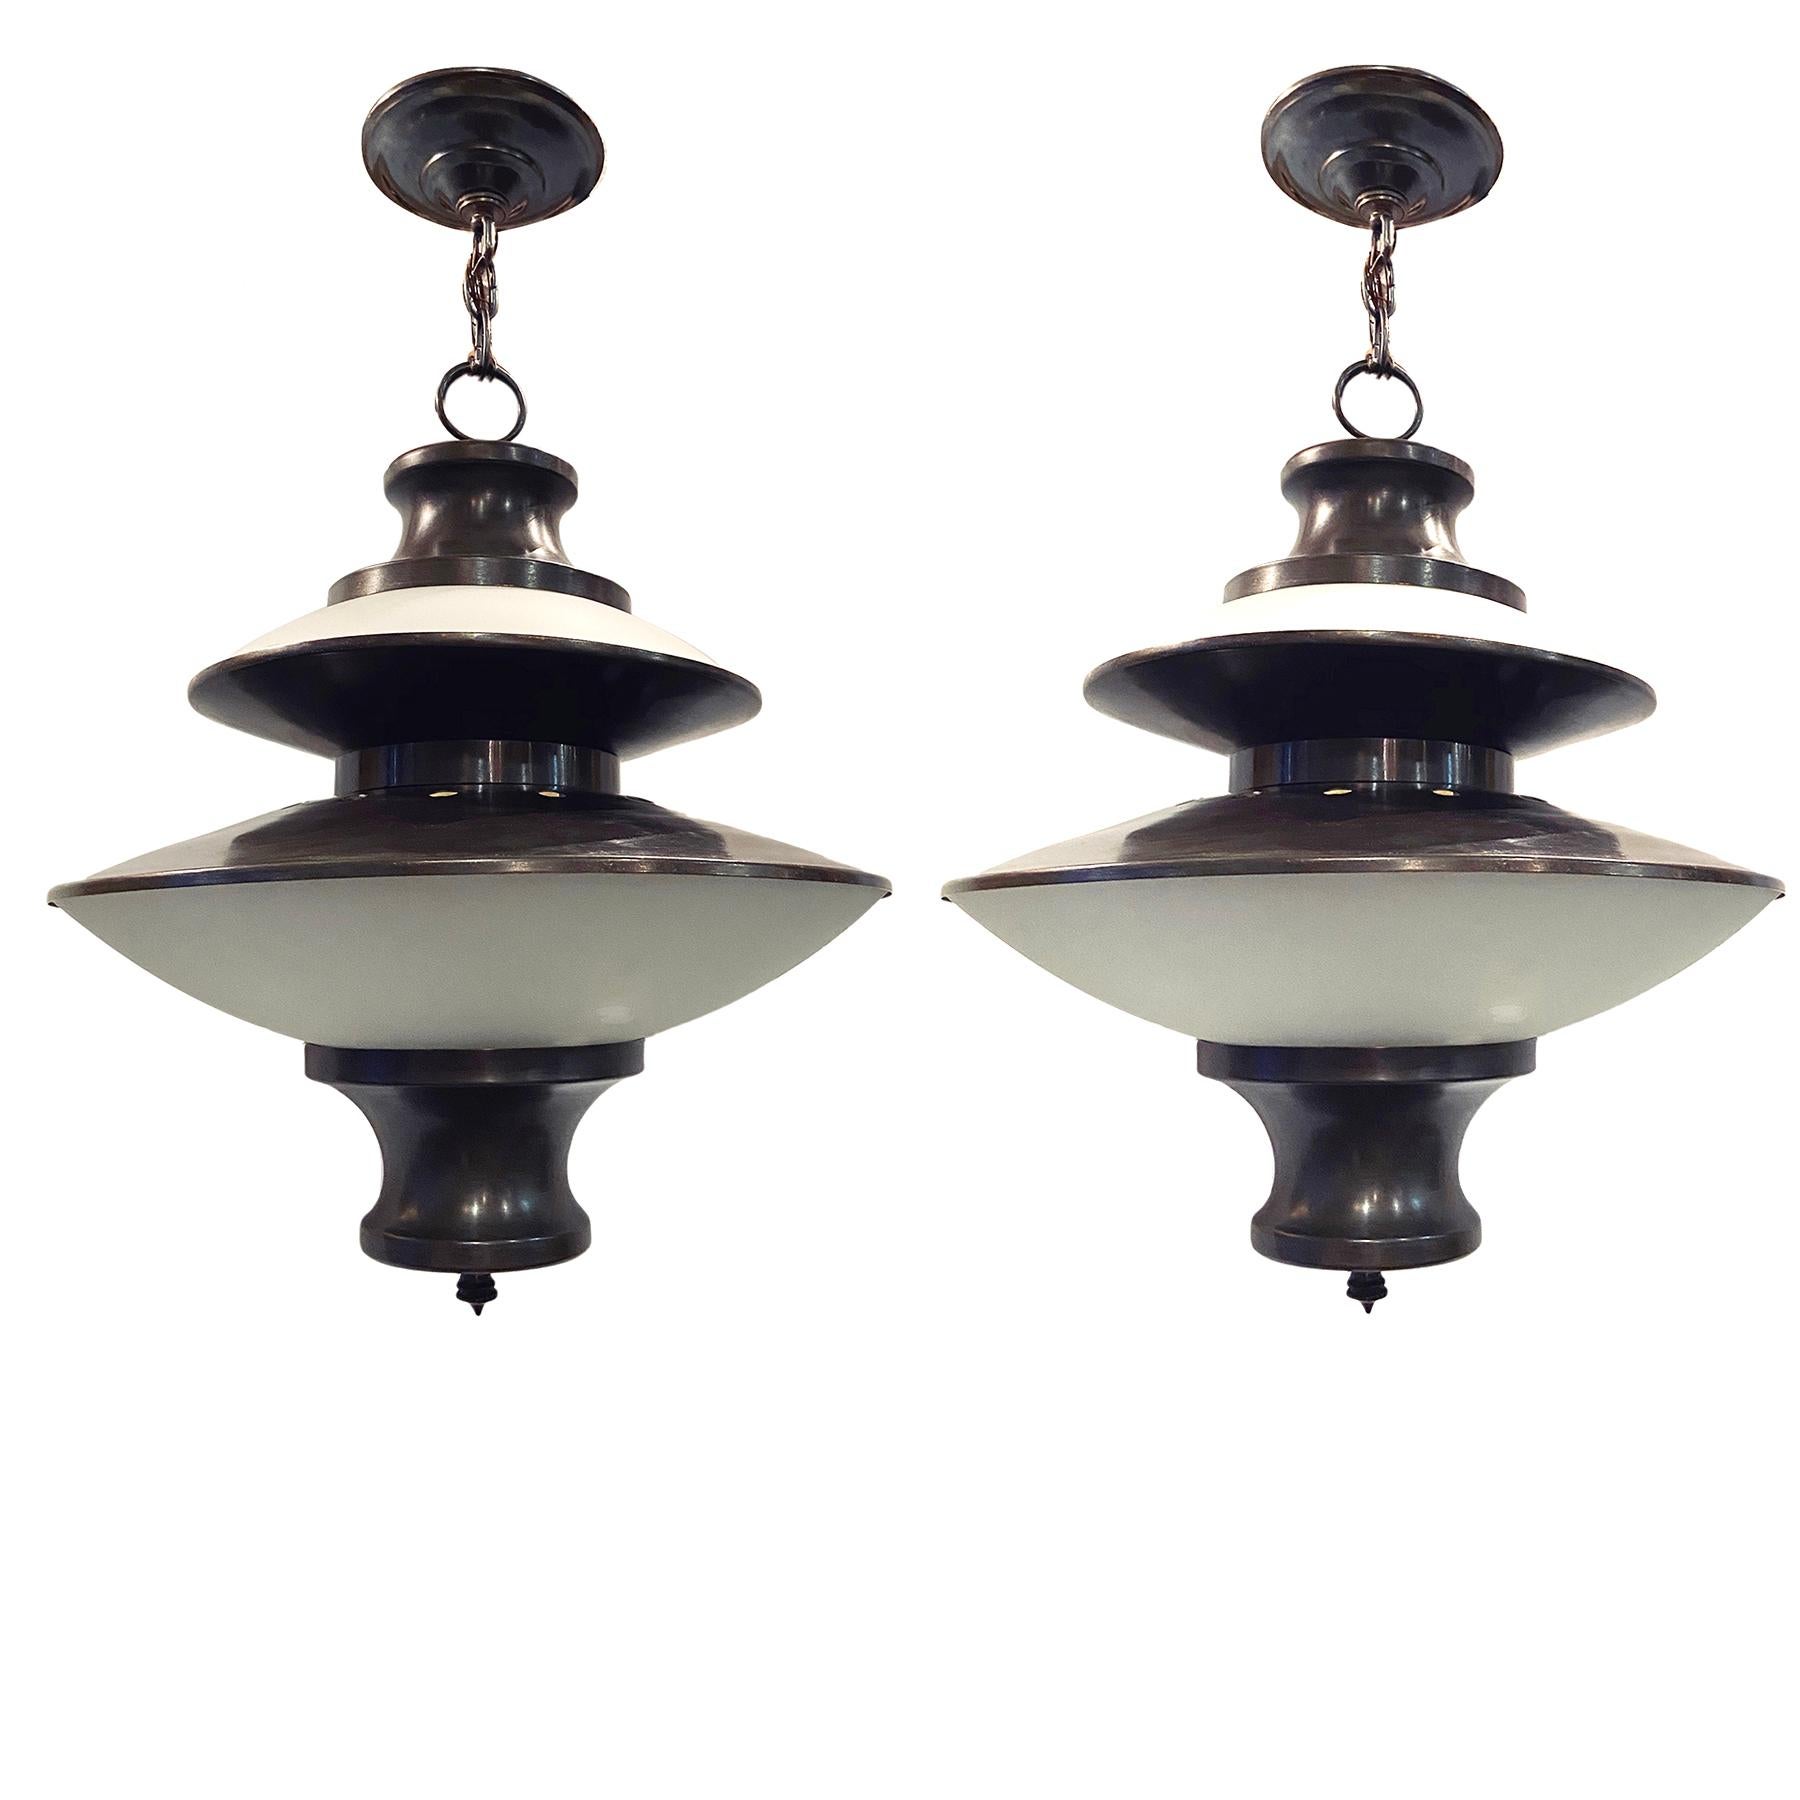 A set of six circa 1950s Italian patinated bronze Italian light fixtures with frosted glass and interior lights. Sold individually.

Measurements:
Diameter: 15